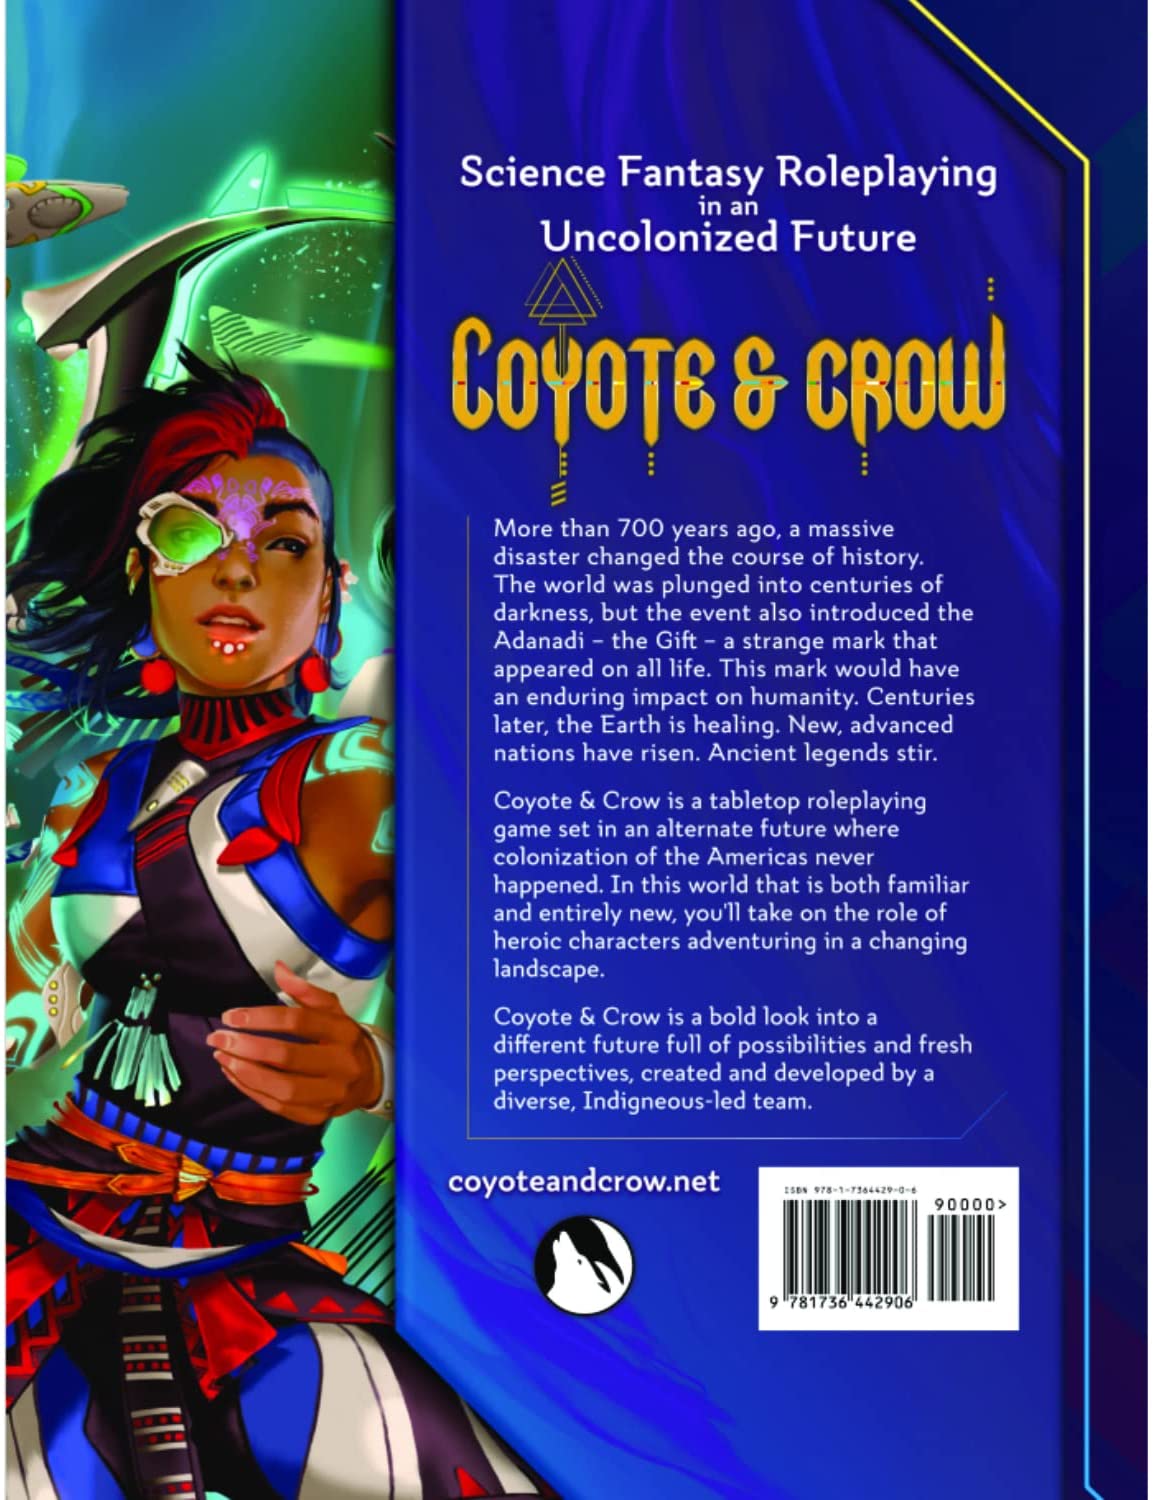 PREORDER: Coyote & Crow - A Science Fantasy RPG Set in an Uncolonized Future - Bards & Cards